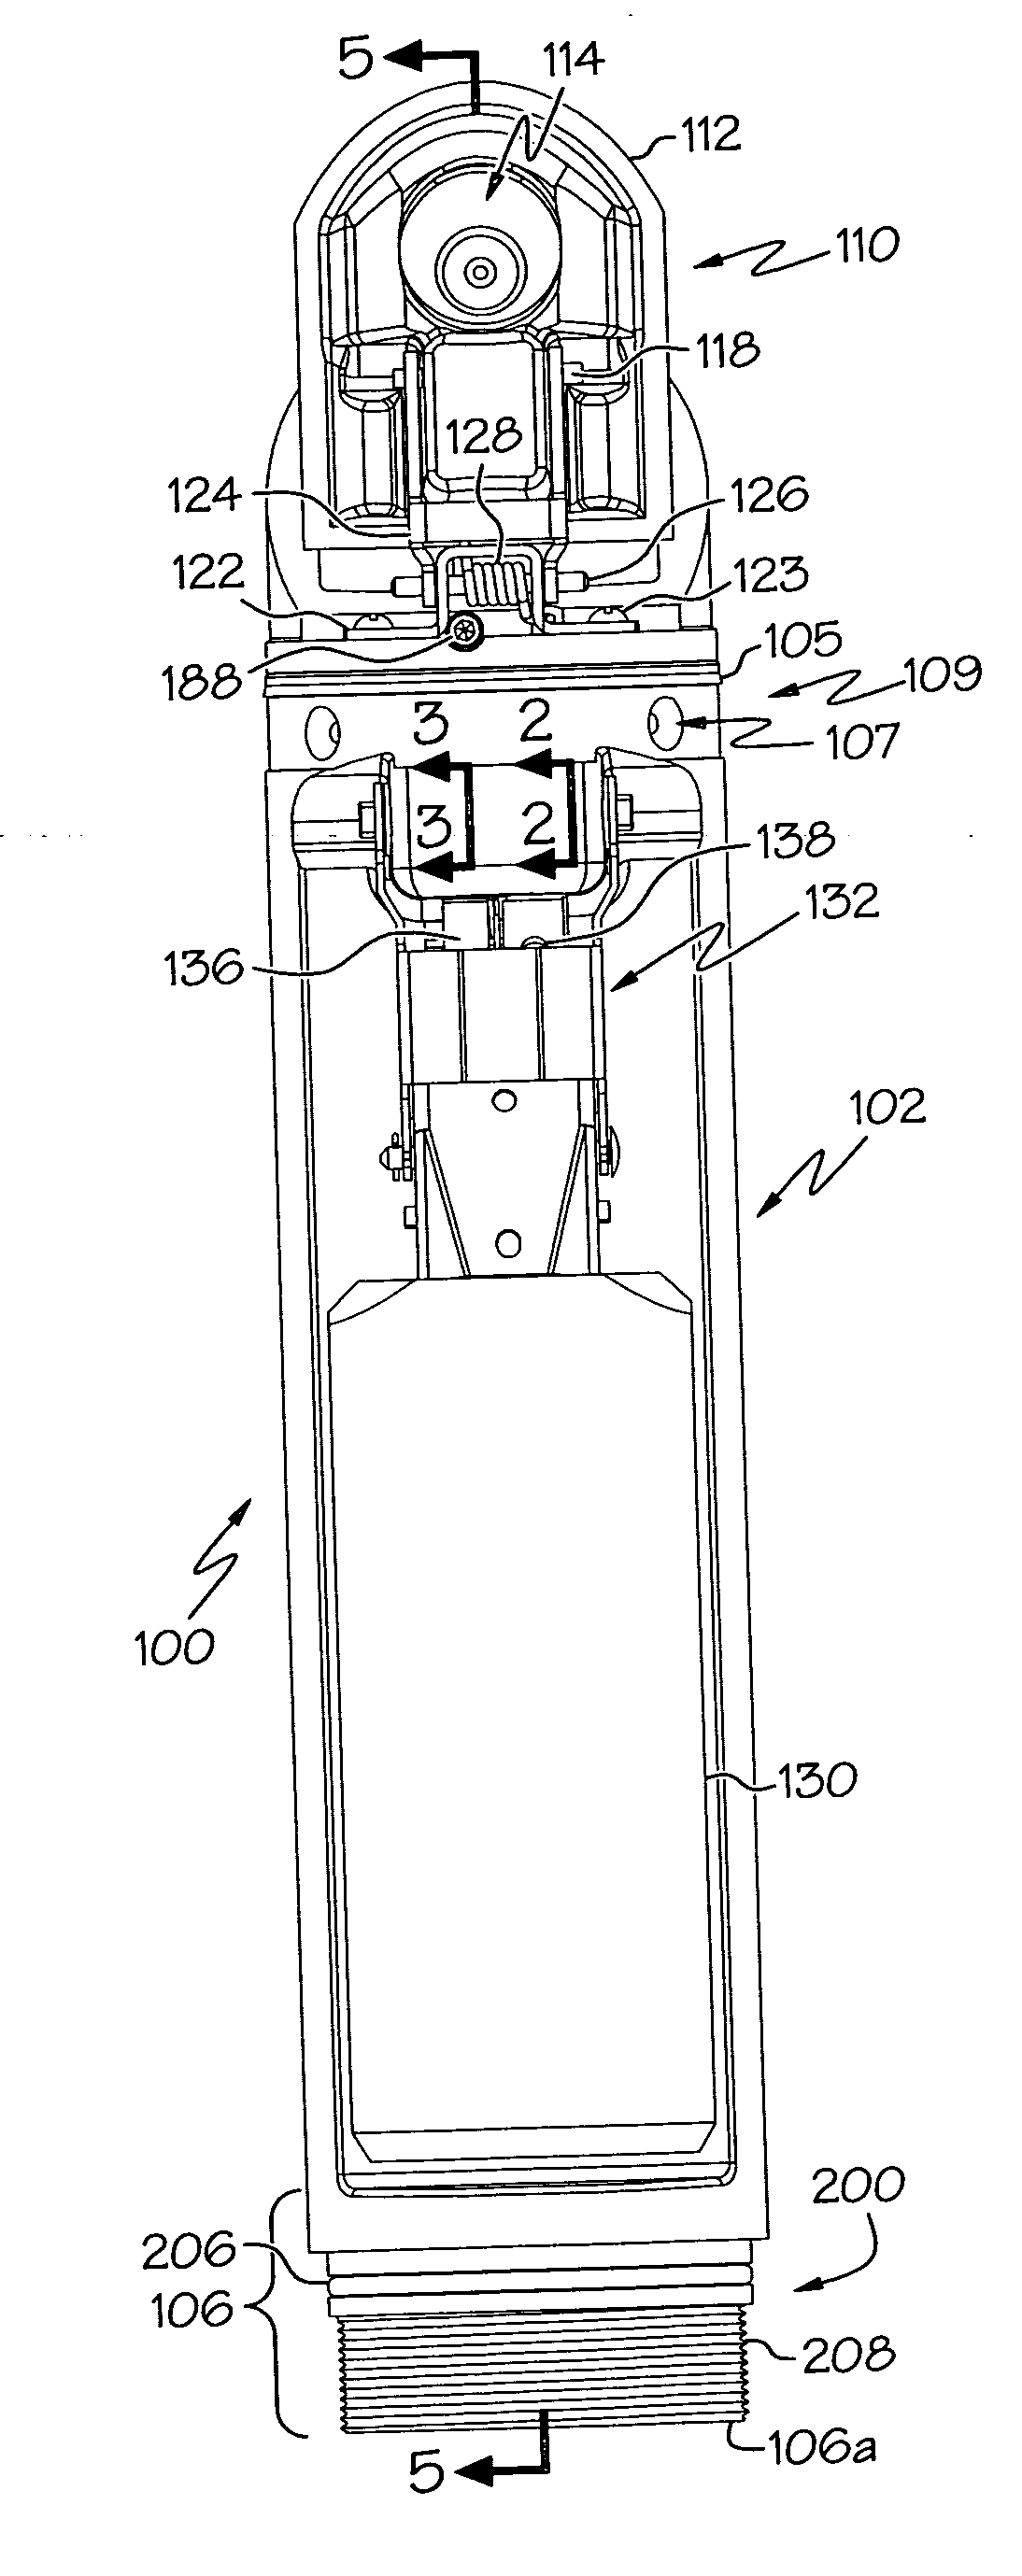 Drop tube segments adapted for use with a liquid reservoir